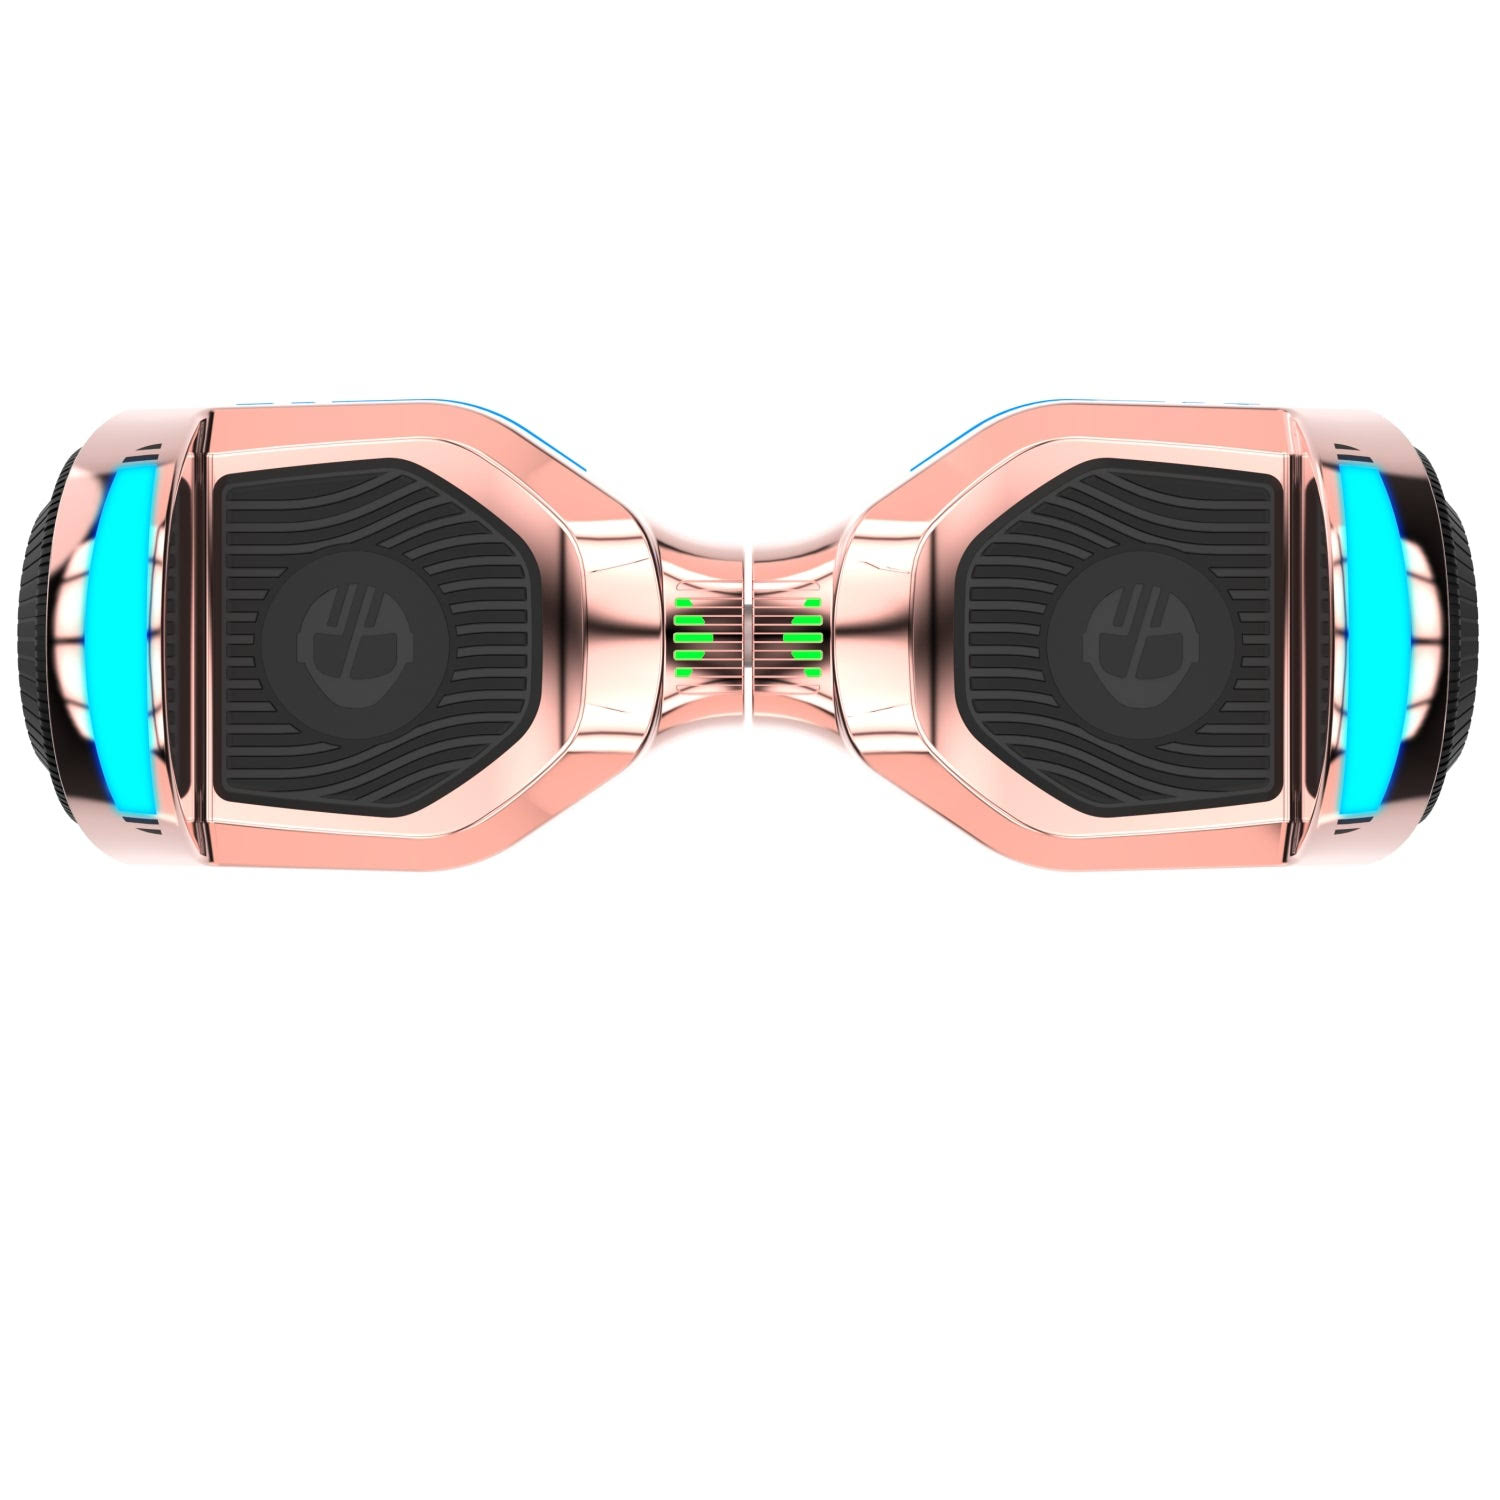 Gotrax Glide Hoverboard Self Balancing Scooter with Bluetooth Speaker, UL2272 Certified, 25.2V 2.6Ah Lithium-Ion Battery, LED 6.5 inch Wheels